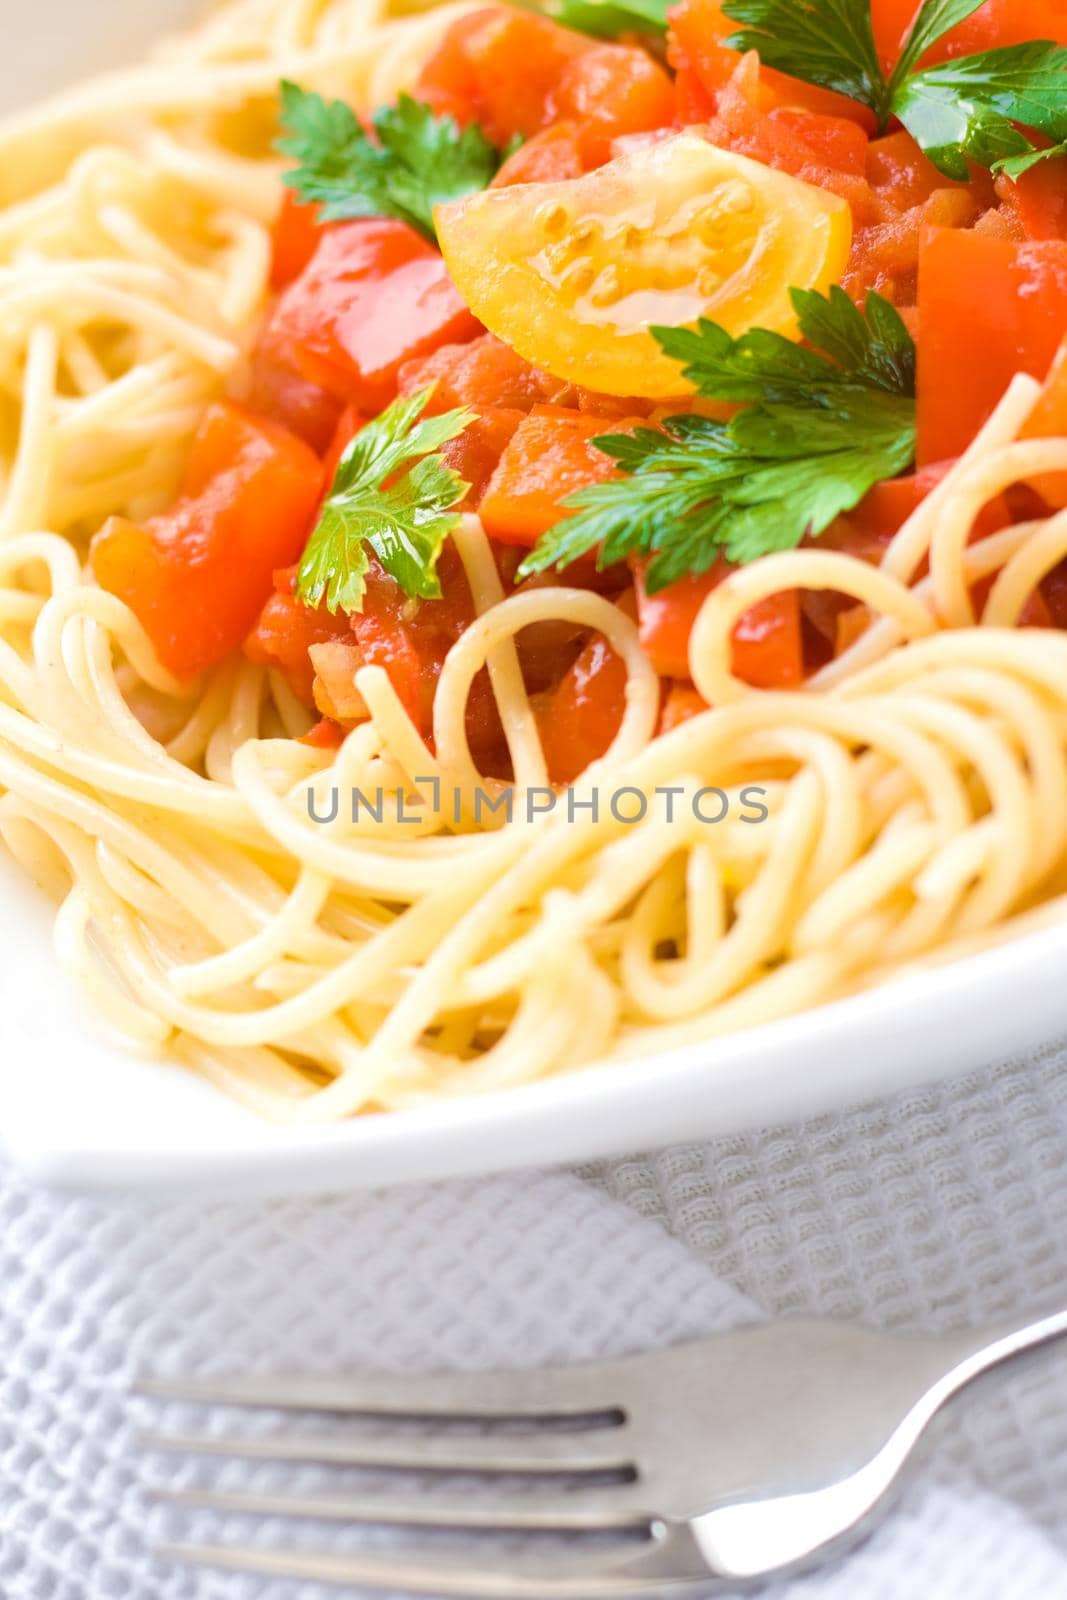 spaghetti with tomato sauce - pasta and italian cuisine recipes styled concept by Anneleven